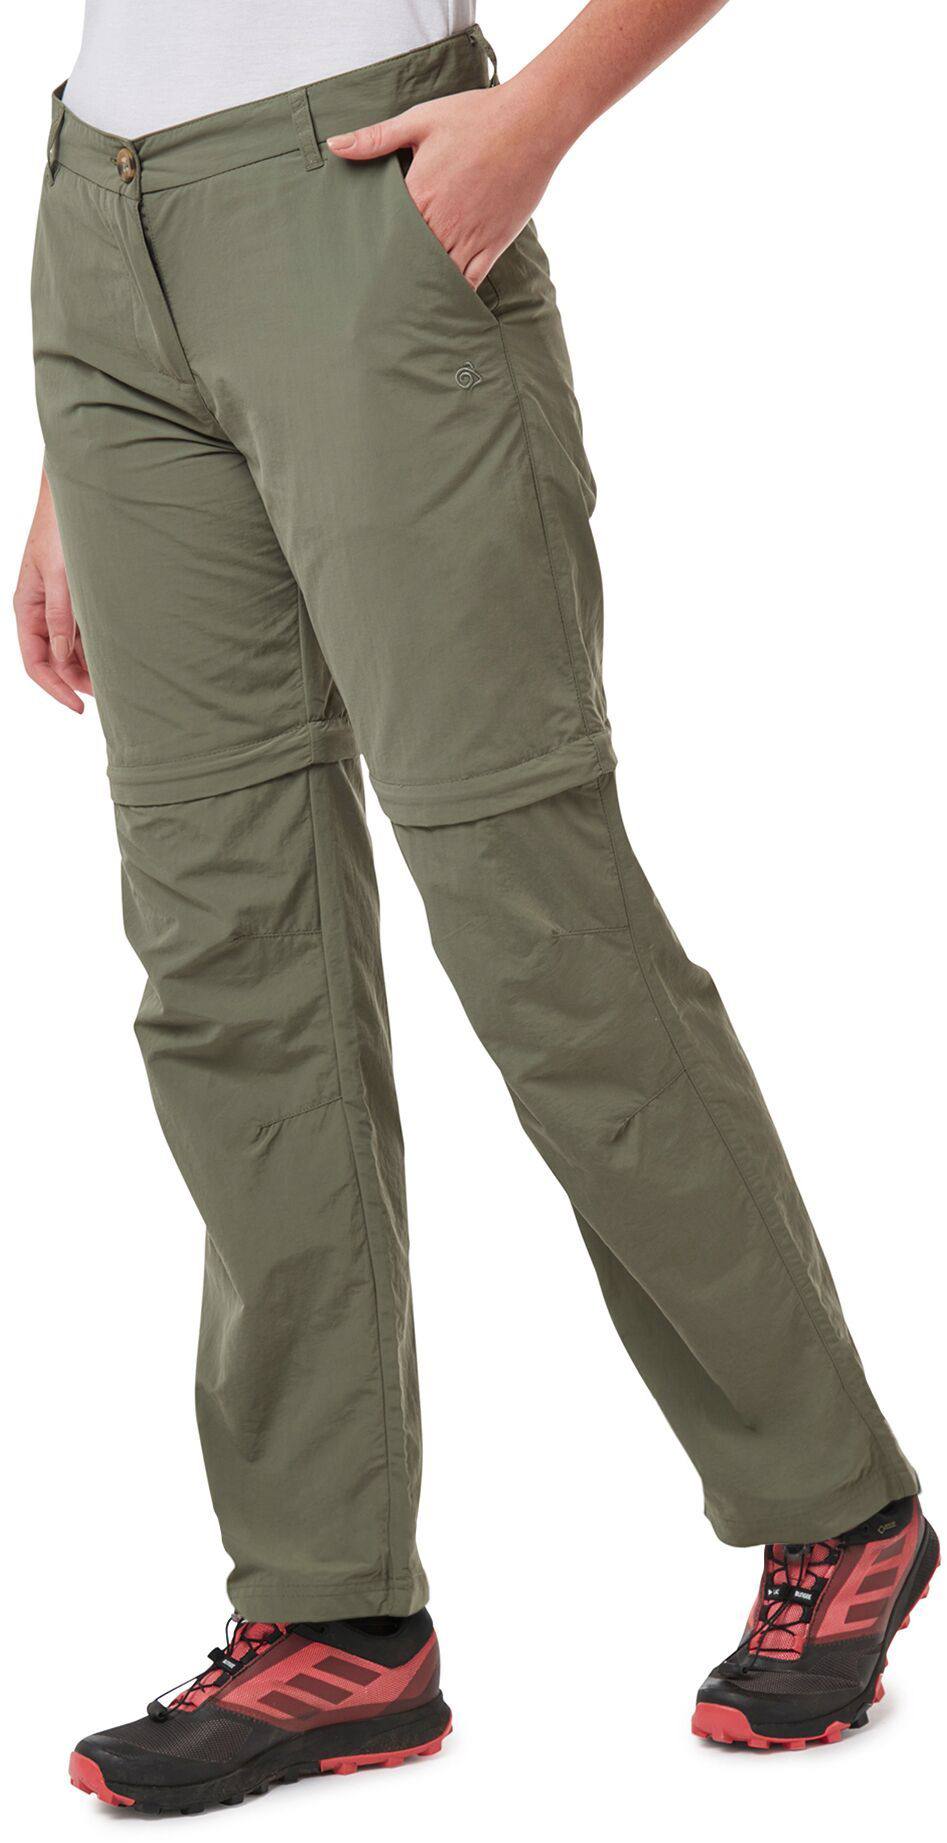 Craghoppers Outdoor Pro Womens Walking Trousers Beige Hiking Pants Long Length 